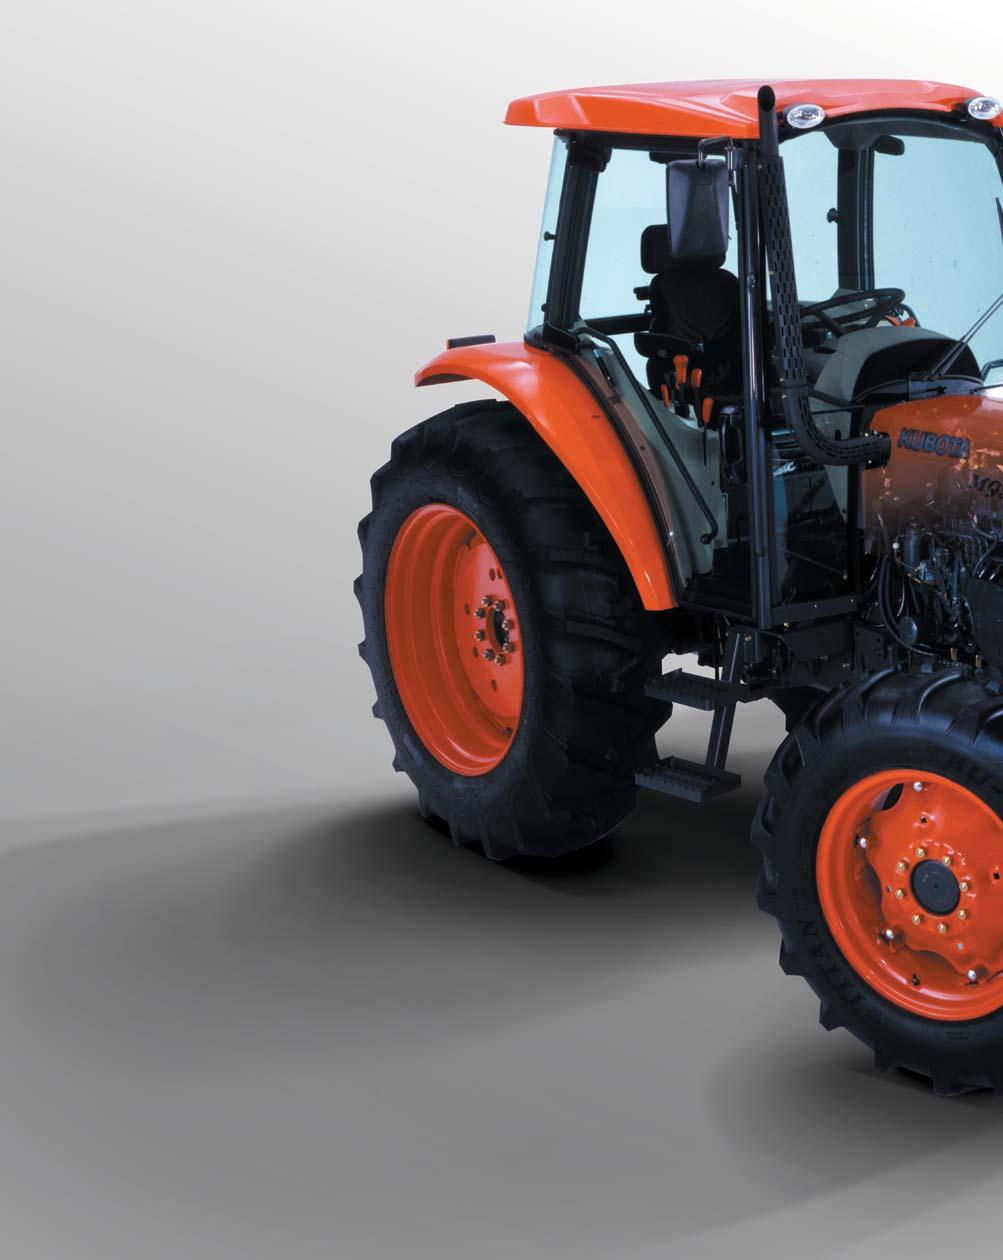 A brand new M-Series from top to bottom, inside and out. Newly Designed Cab The cab of our M-Series tractors has been completely redesigned.